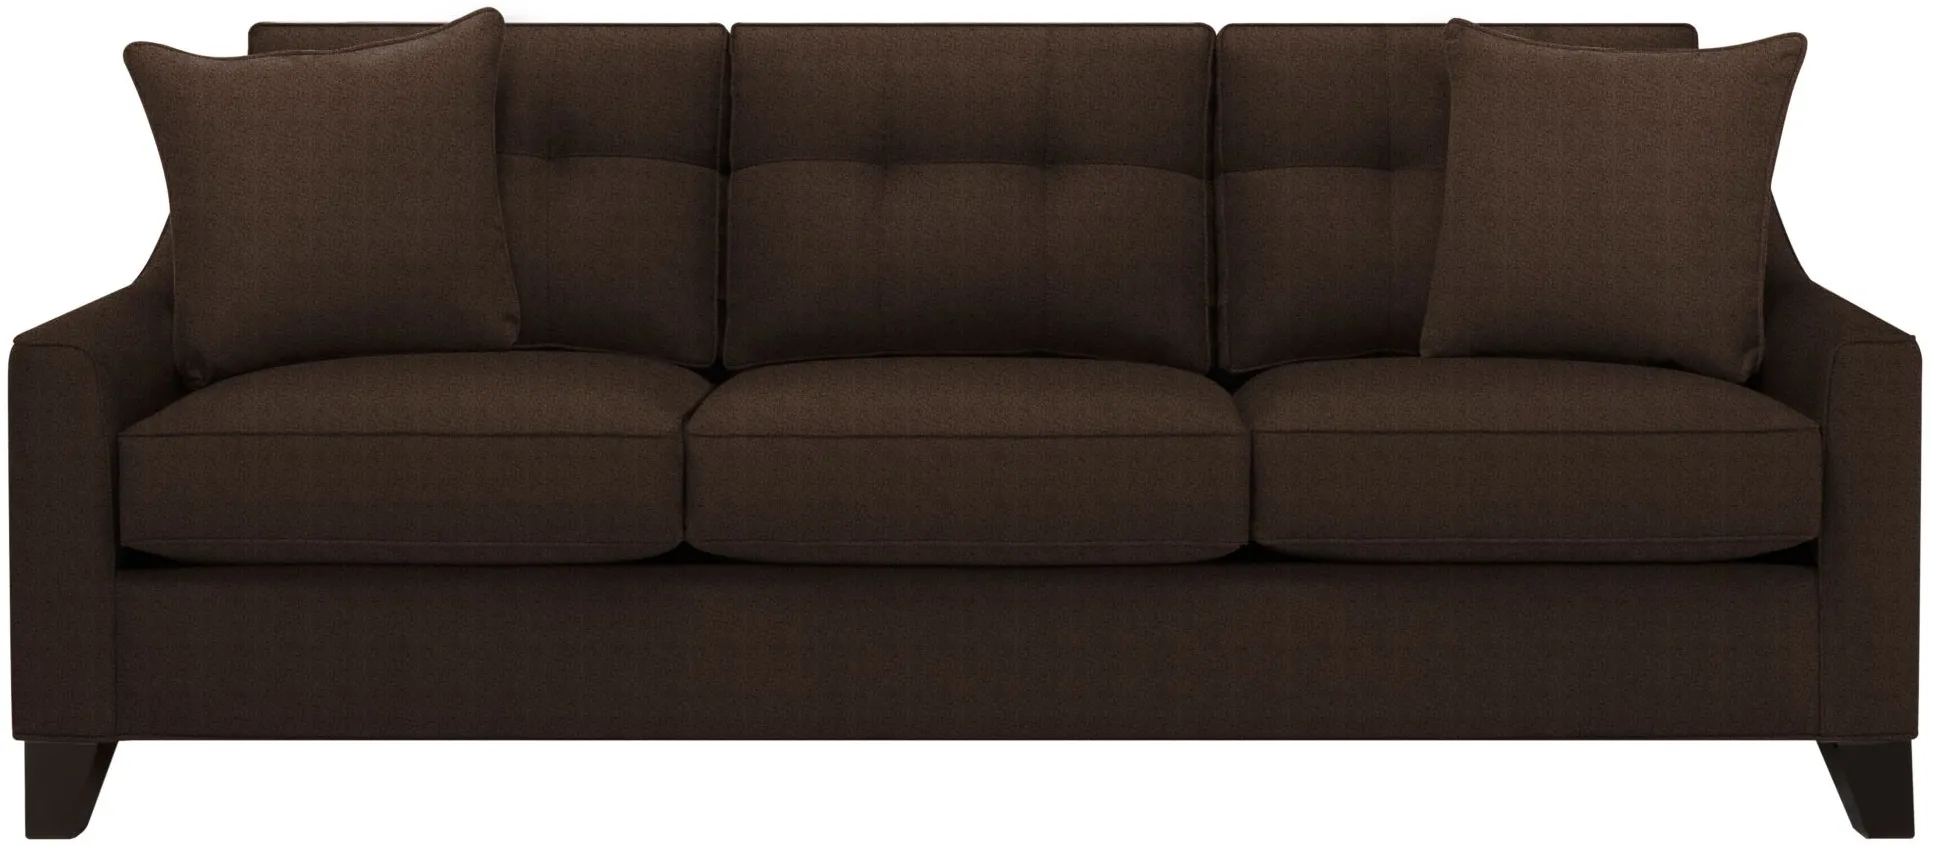 Carmine Sofa in Suede so Soft Chocolate by H.M. Richards